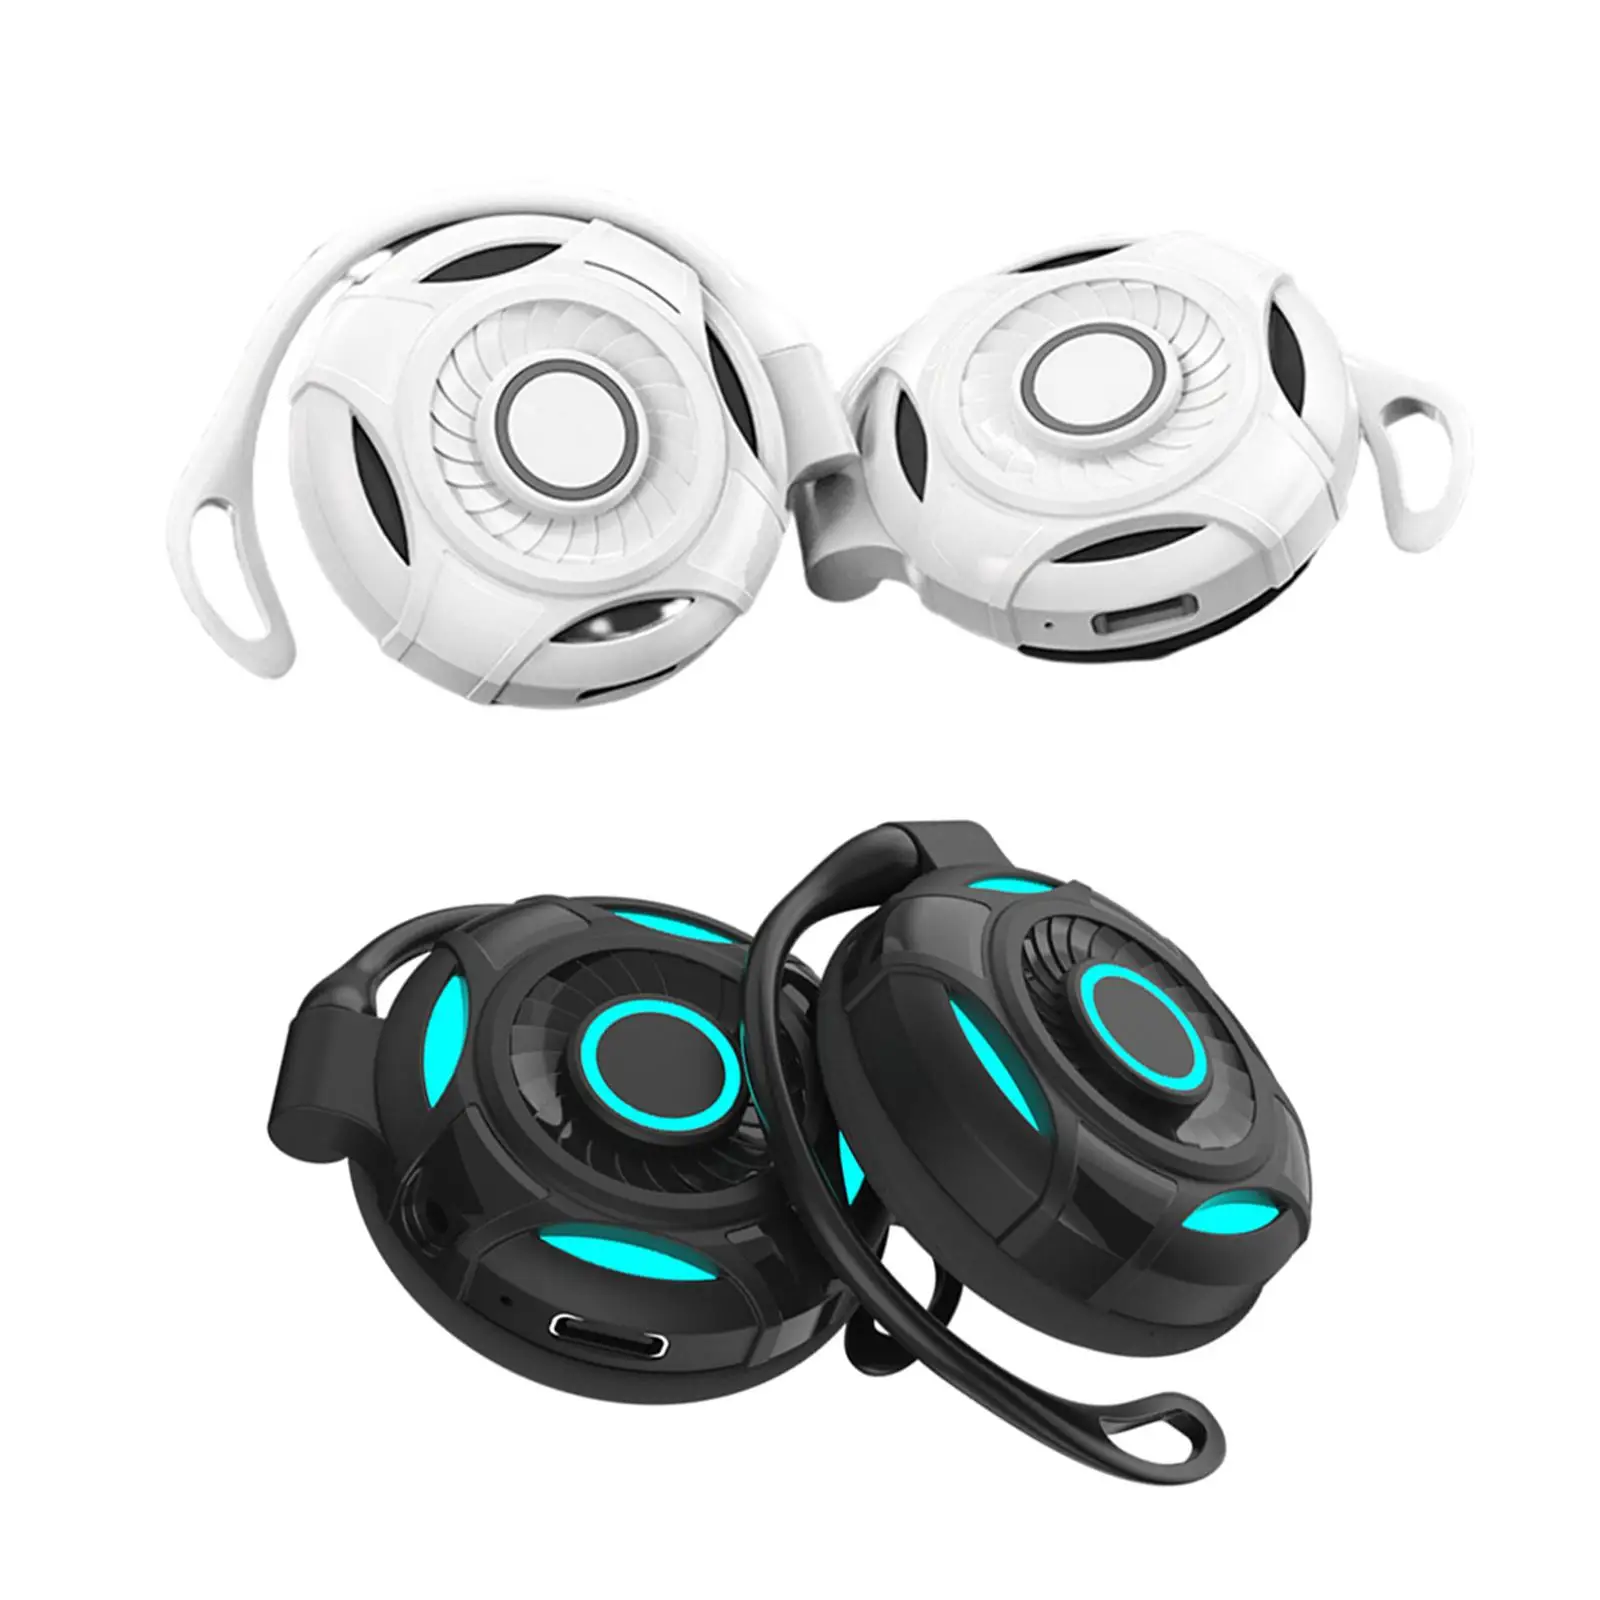 Bluetooth 5.2 Headphones Smart Touch Control Earphone HiFi 3D Sound Game Headset for Gamers